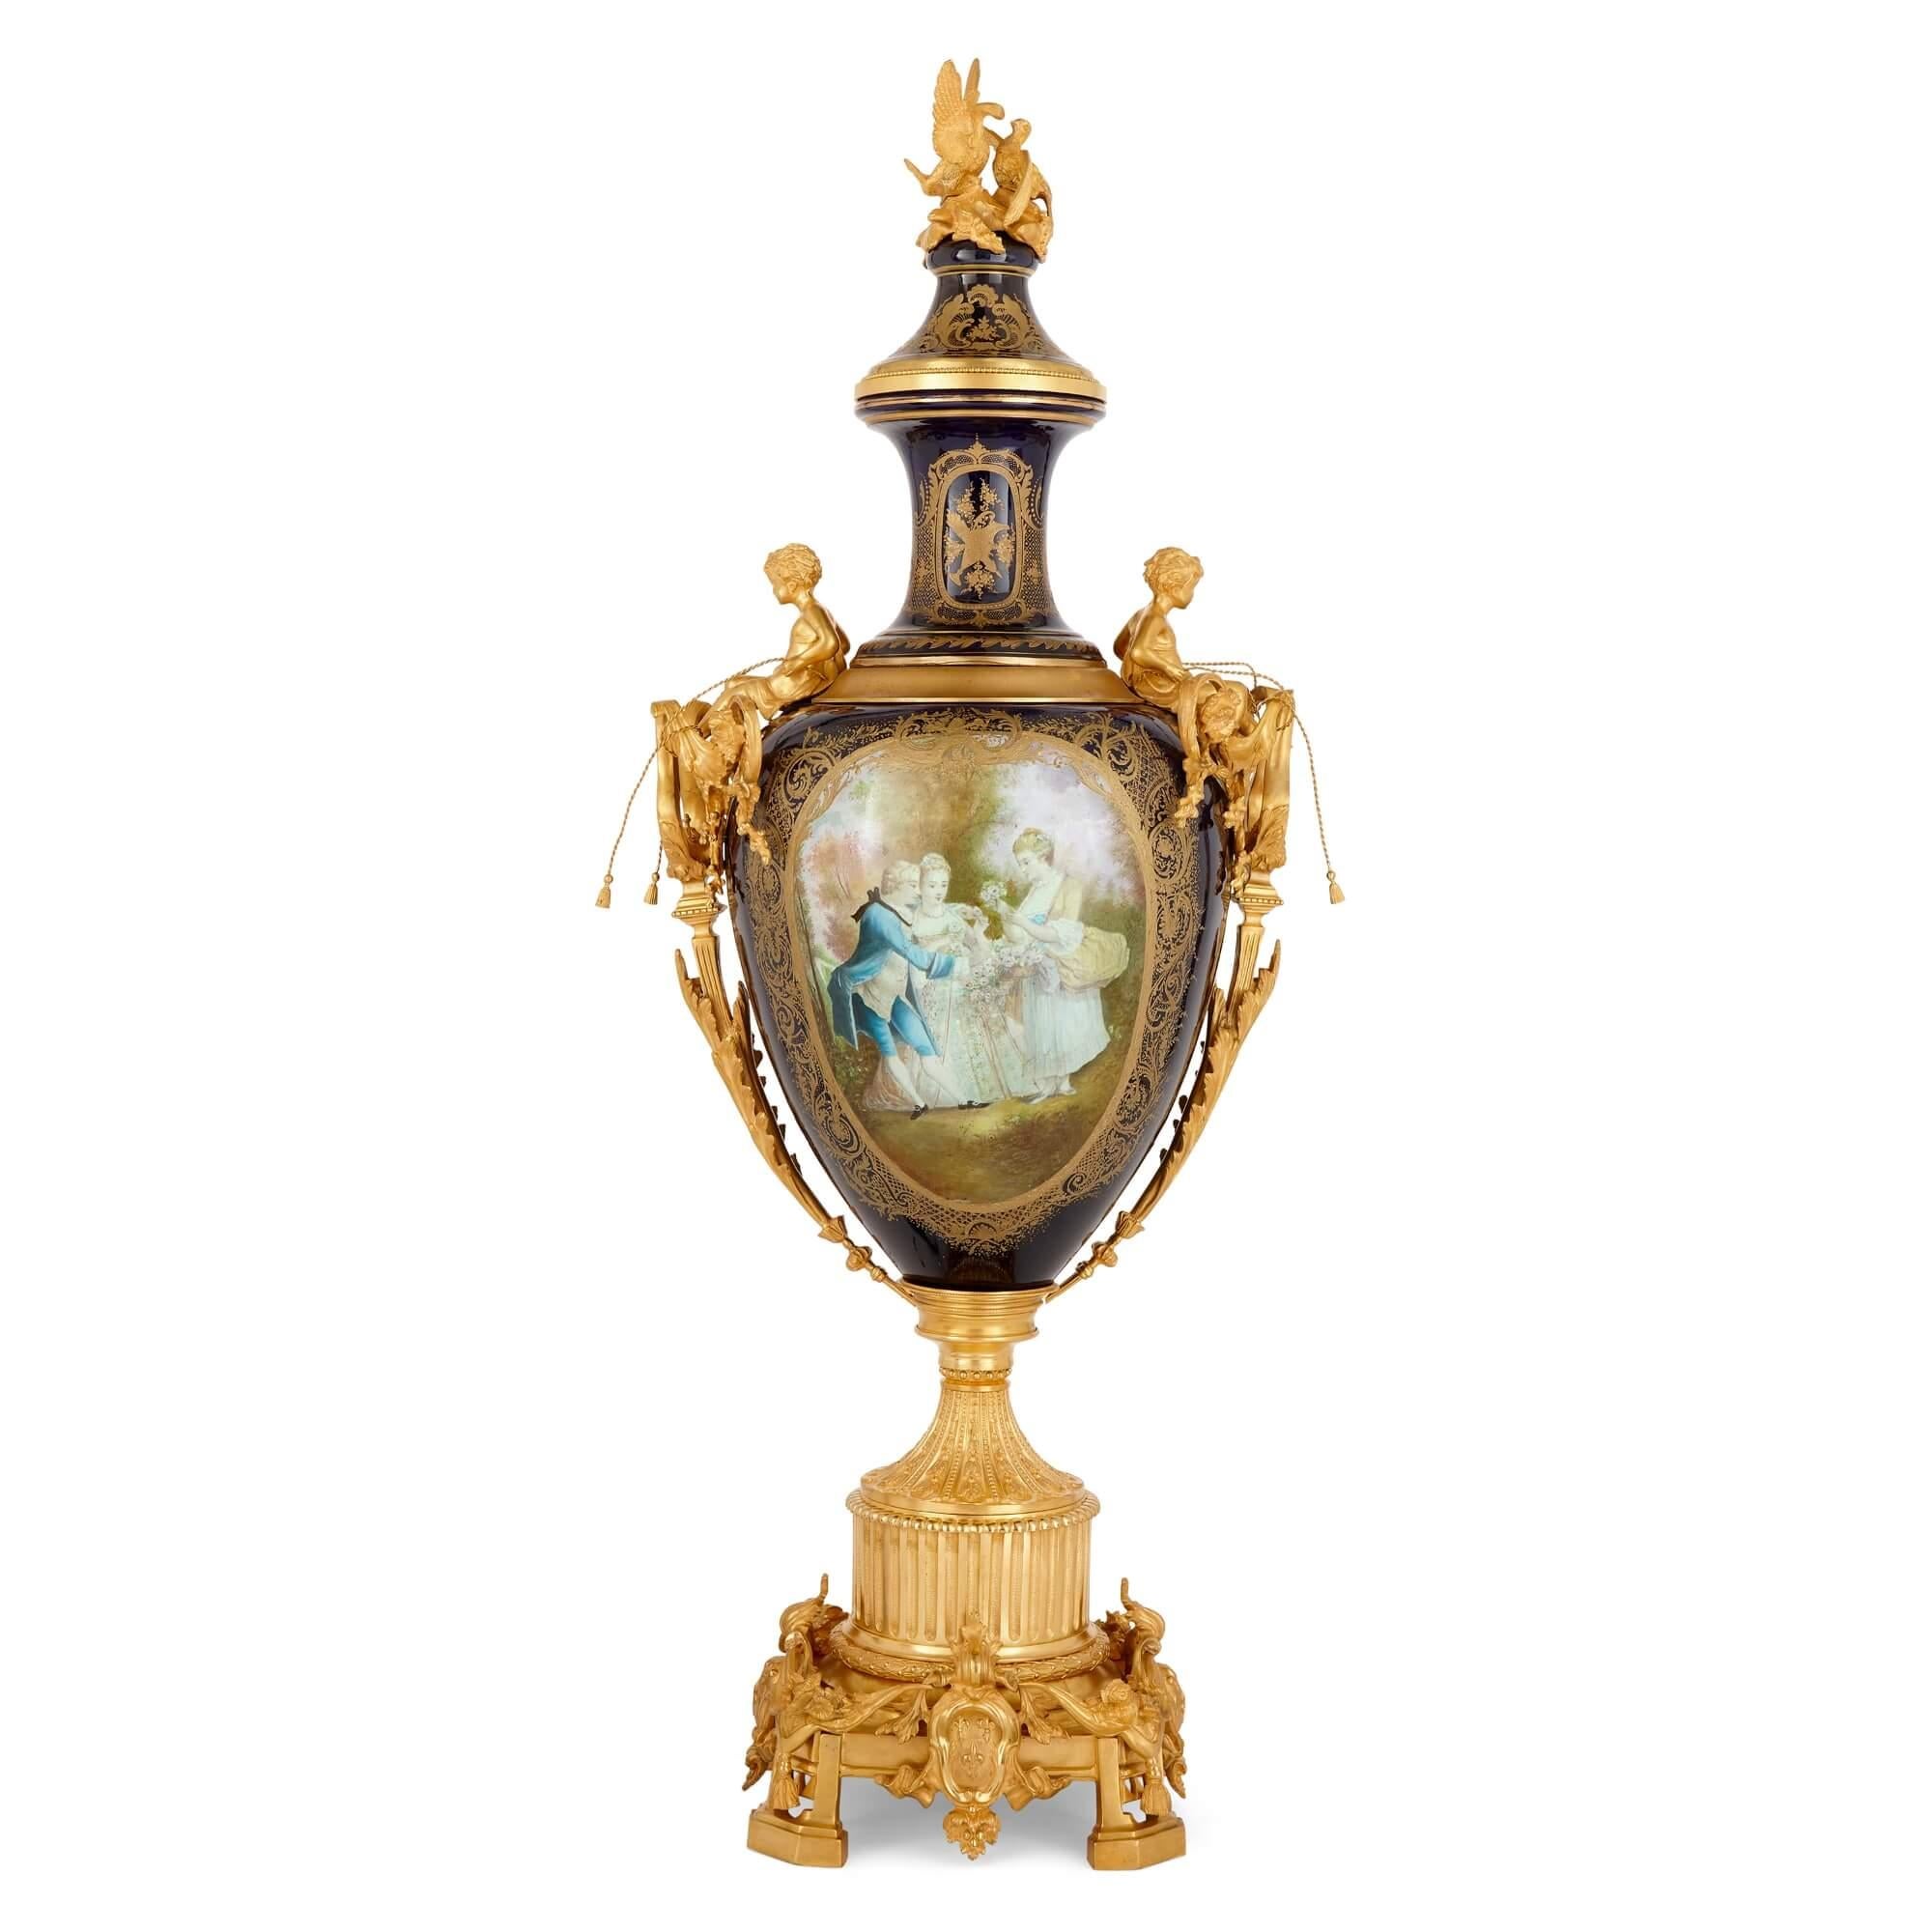 Large Sèvres-style gilt-bronze mounted porcelain vase with pedestal
French, Early 20th Century
Vase: height 162cm, width 63cm, depth 48cm
Stand: height 66cm, width 48cm, depth 48cm

This impressively large Sèvres style porcelain vase is ovoid